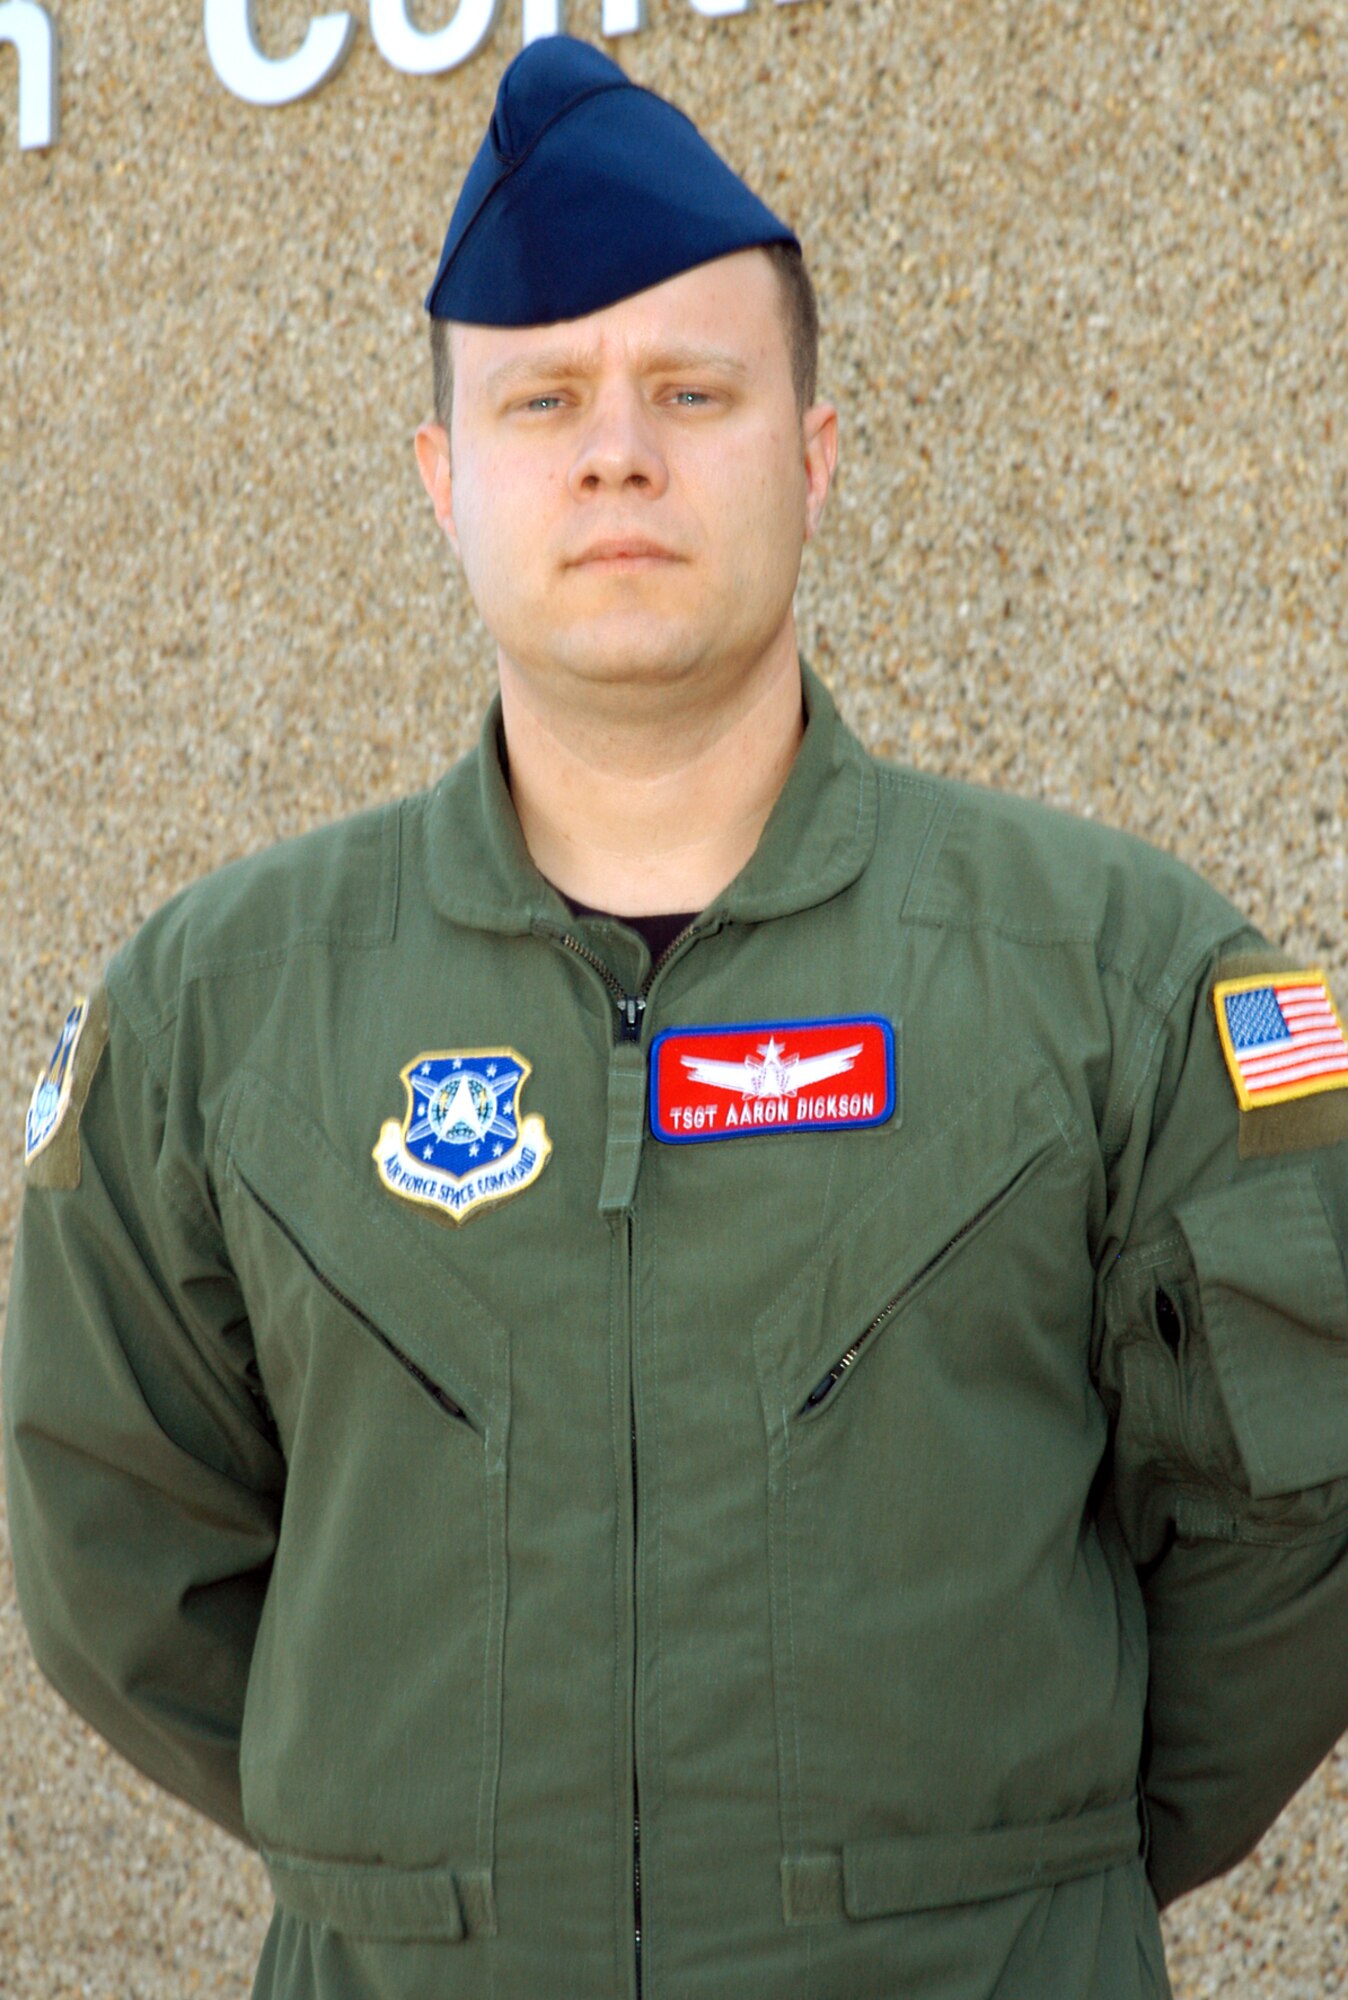 Tech. Sgt. Aaron Dickson is the mission crew chief instructor for the SBIRS training course at Schriever Air Force Base, Colo. He is assigned to the 460th Operations Group Detachment 1.